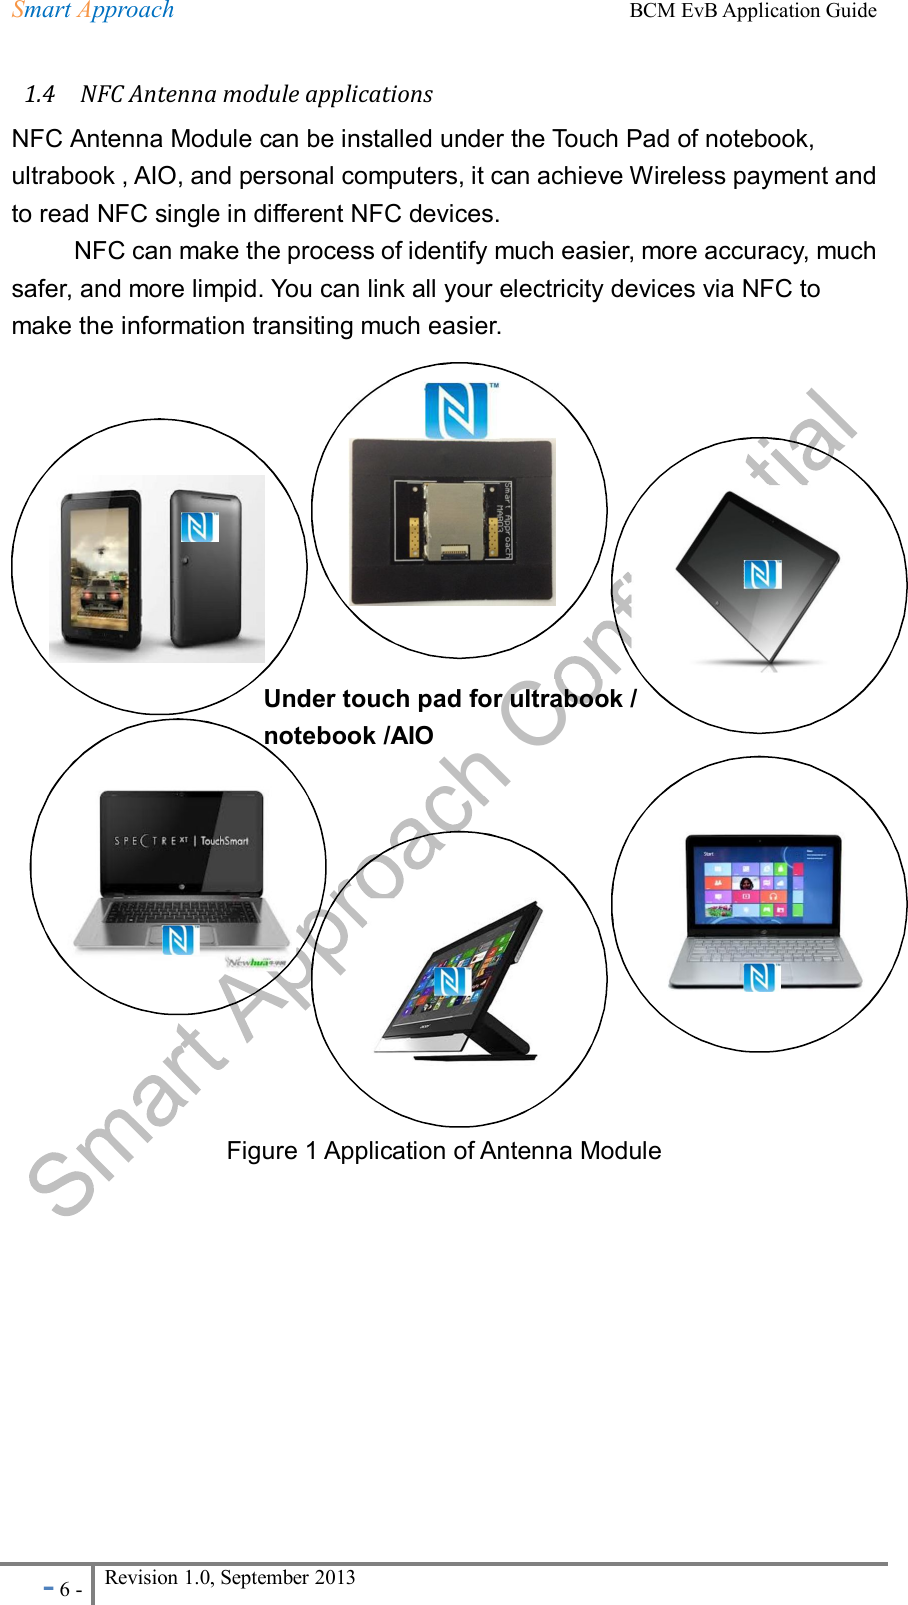 Smart Approach    BCM EvB Application Guide - 6 - Revision 1.0, September 2013                                                               1.4    NFC Antenna module applications NFC Antenna Module can be installed under the Touch Pad of notebook, ultrabook , AIO, and personal computers, it can achieve Wireless payment and to read NFC single in different NFC devices.           NFC can make the process of identify much easier, more accuracy, much safer, and more limpid. You can link all your electricity devices via NFC to make the information transiting much easier.                      Figure 1 Application of Antenna Module          Under touch pad for ultrabook / notebook /AIO  